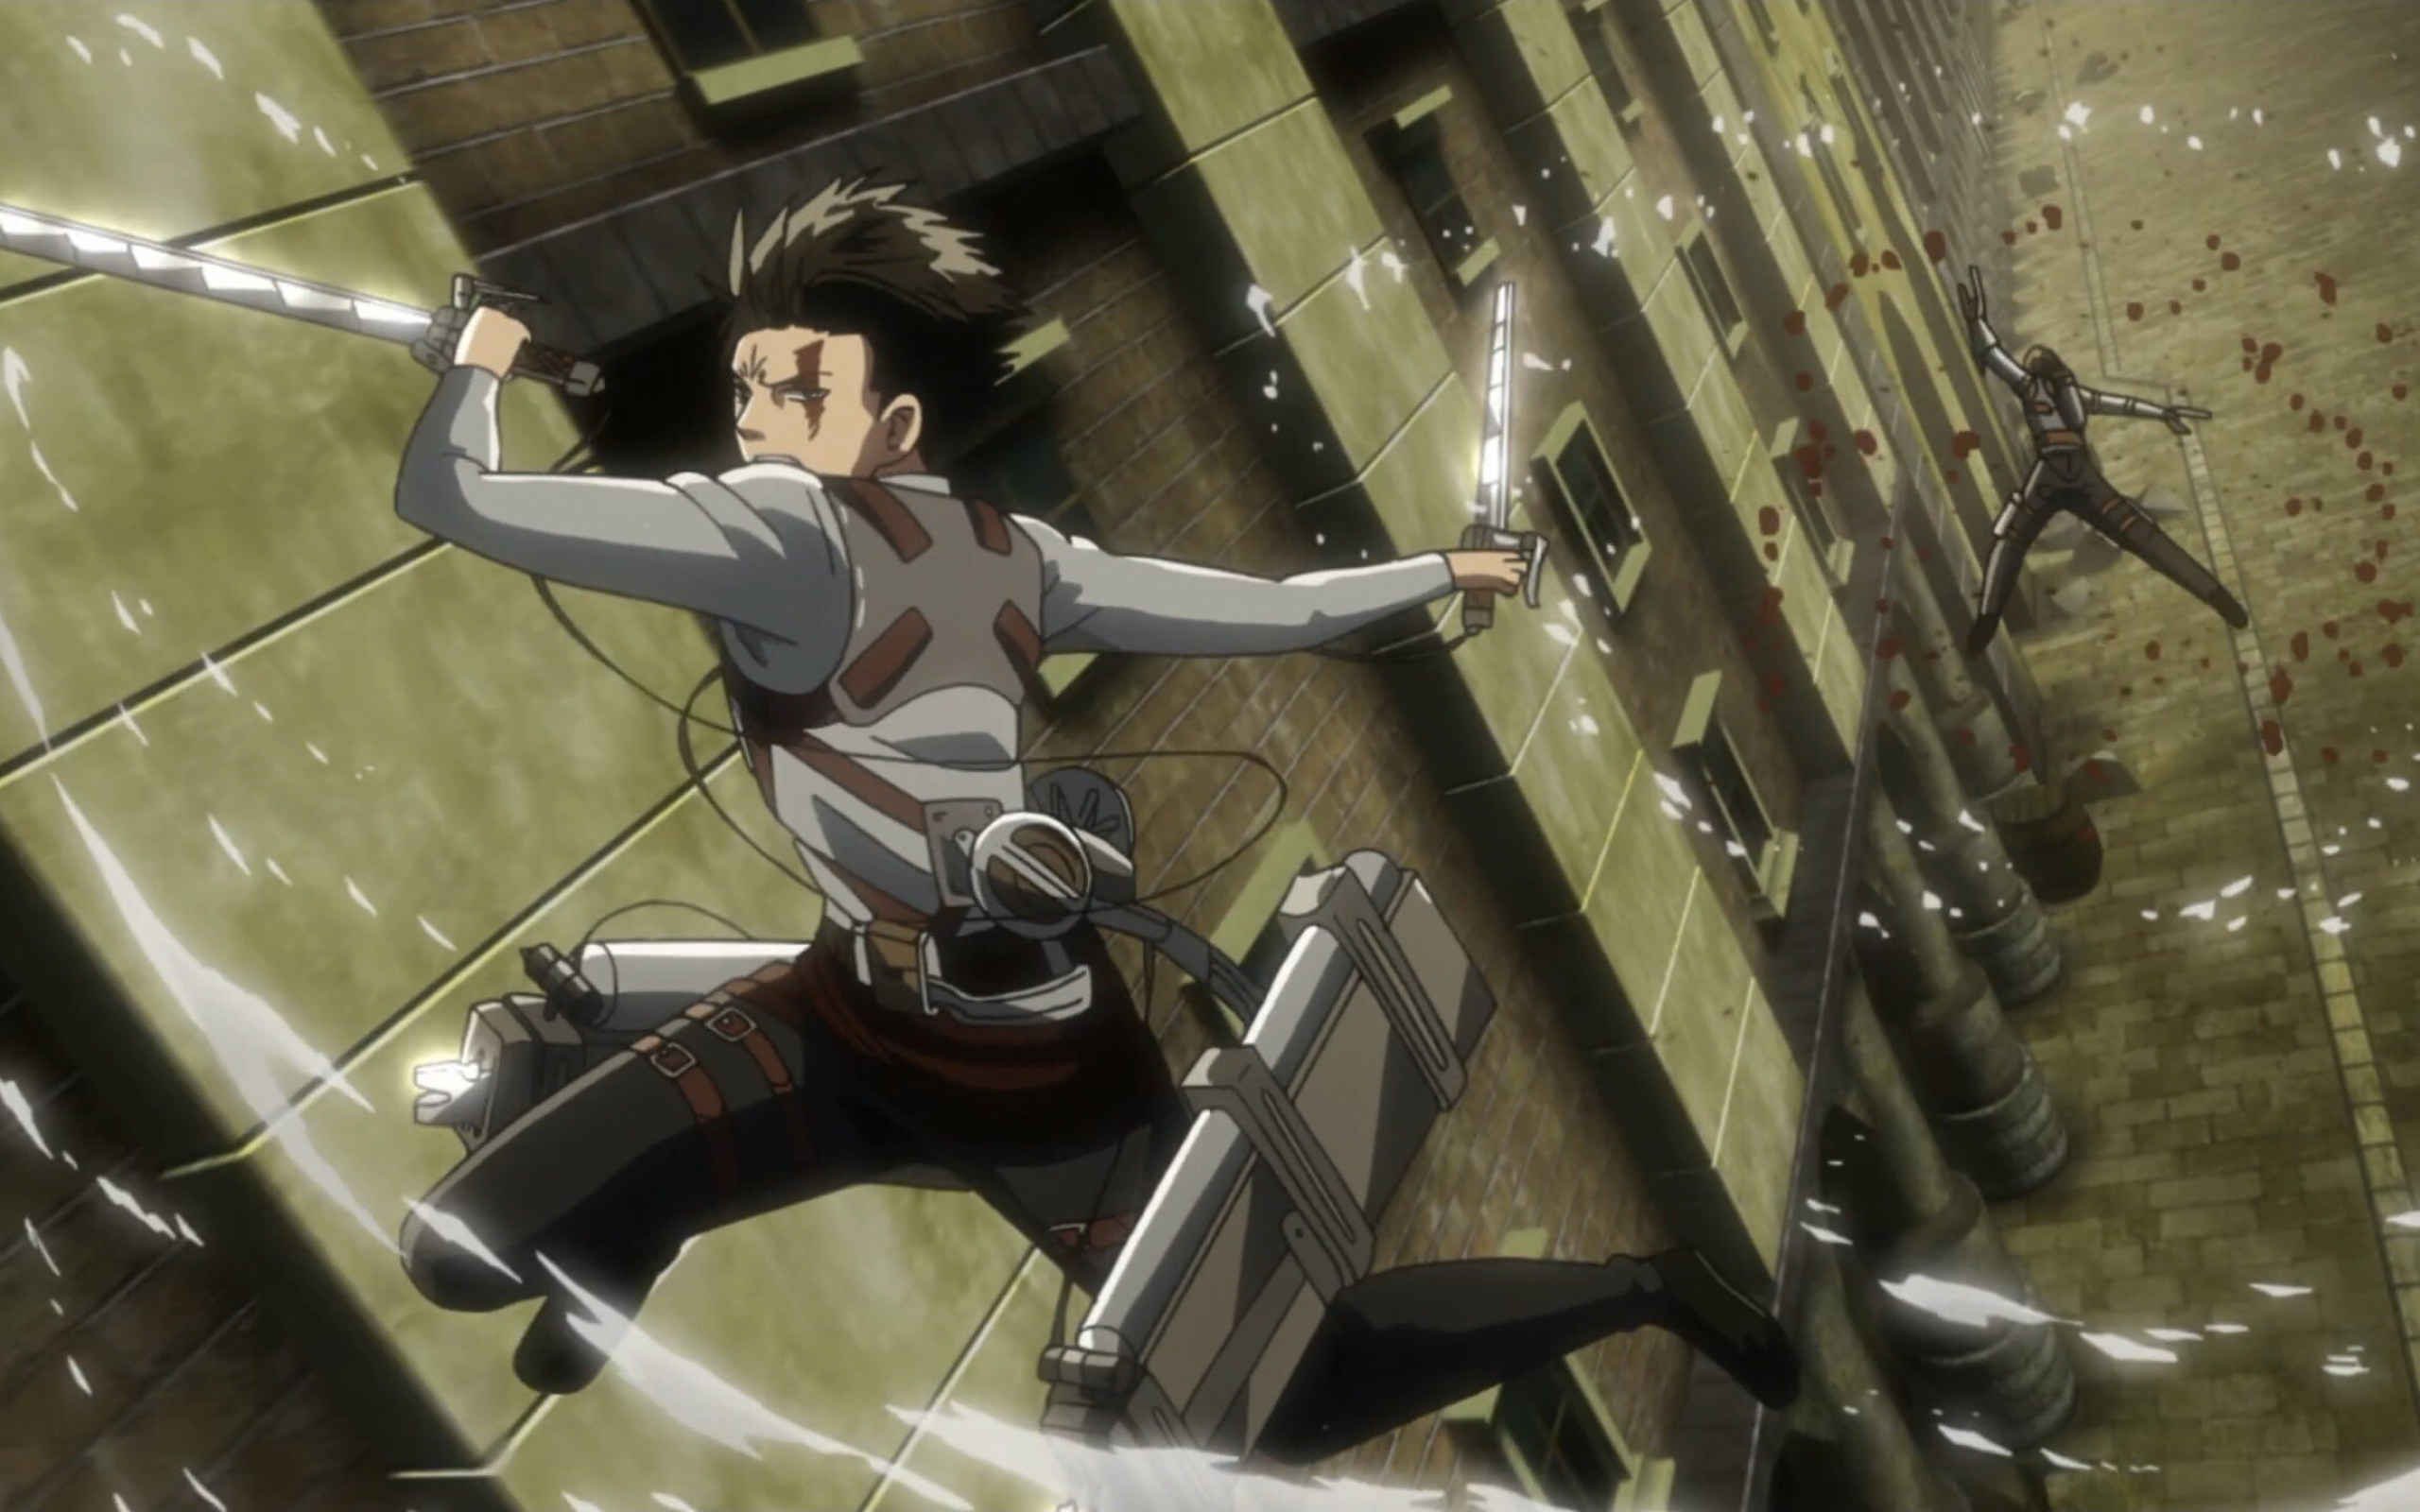 Attack on Titan (TV Series): Anime, Survey Corps members, Fictional character. 2560x1600 HD Wallpaper.